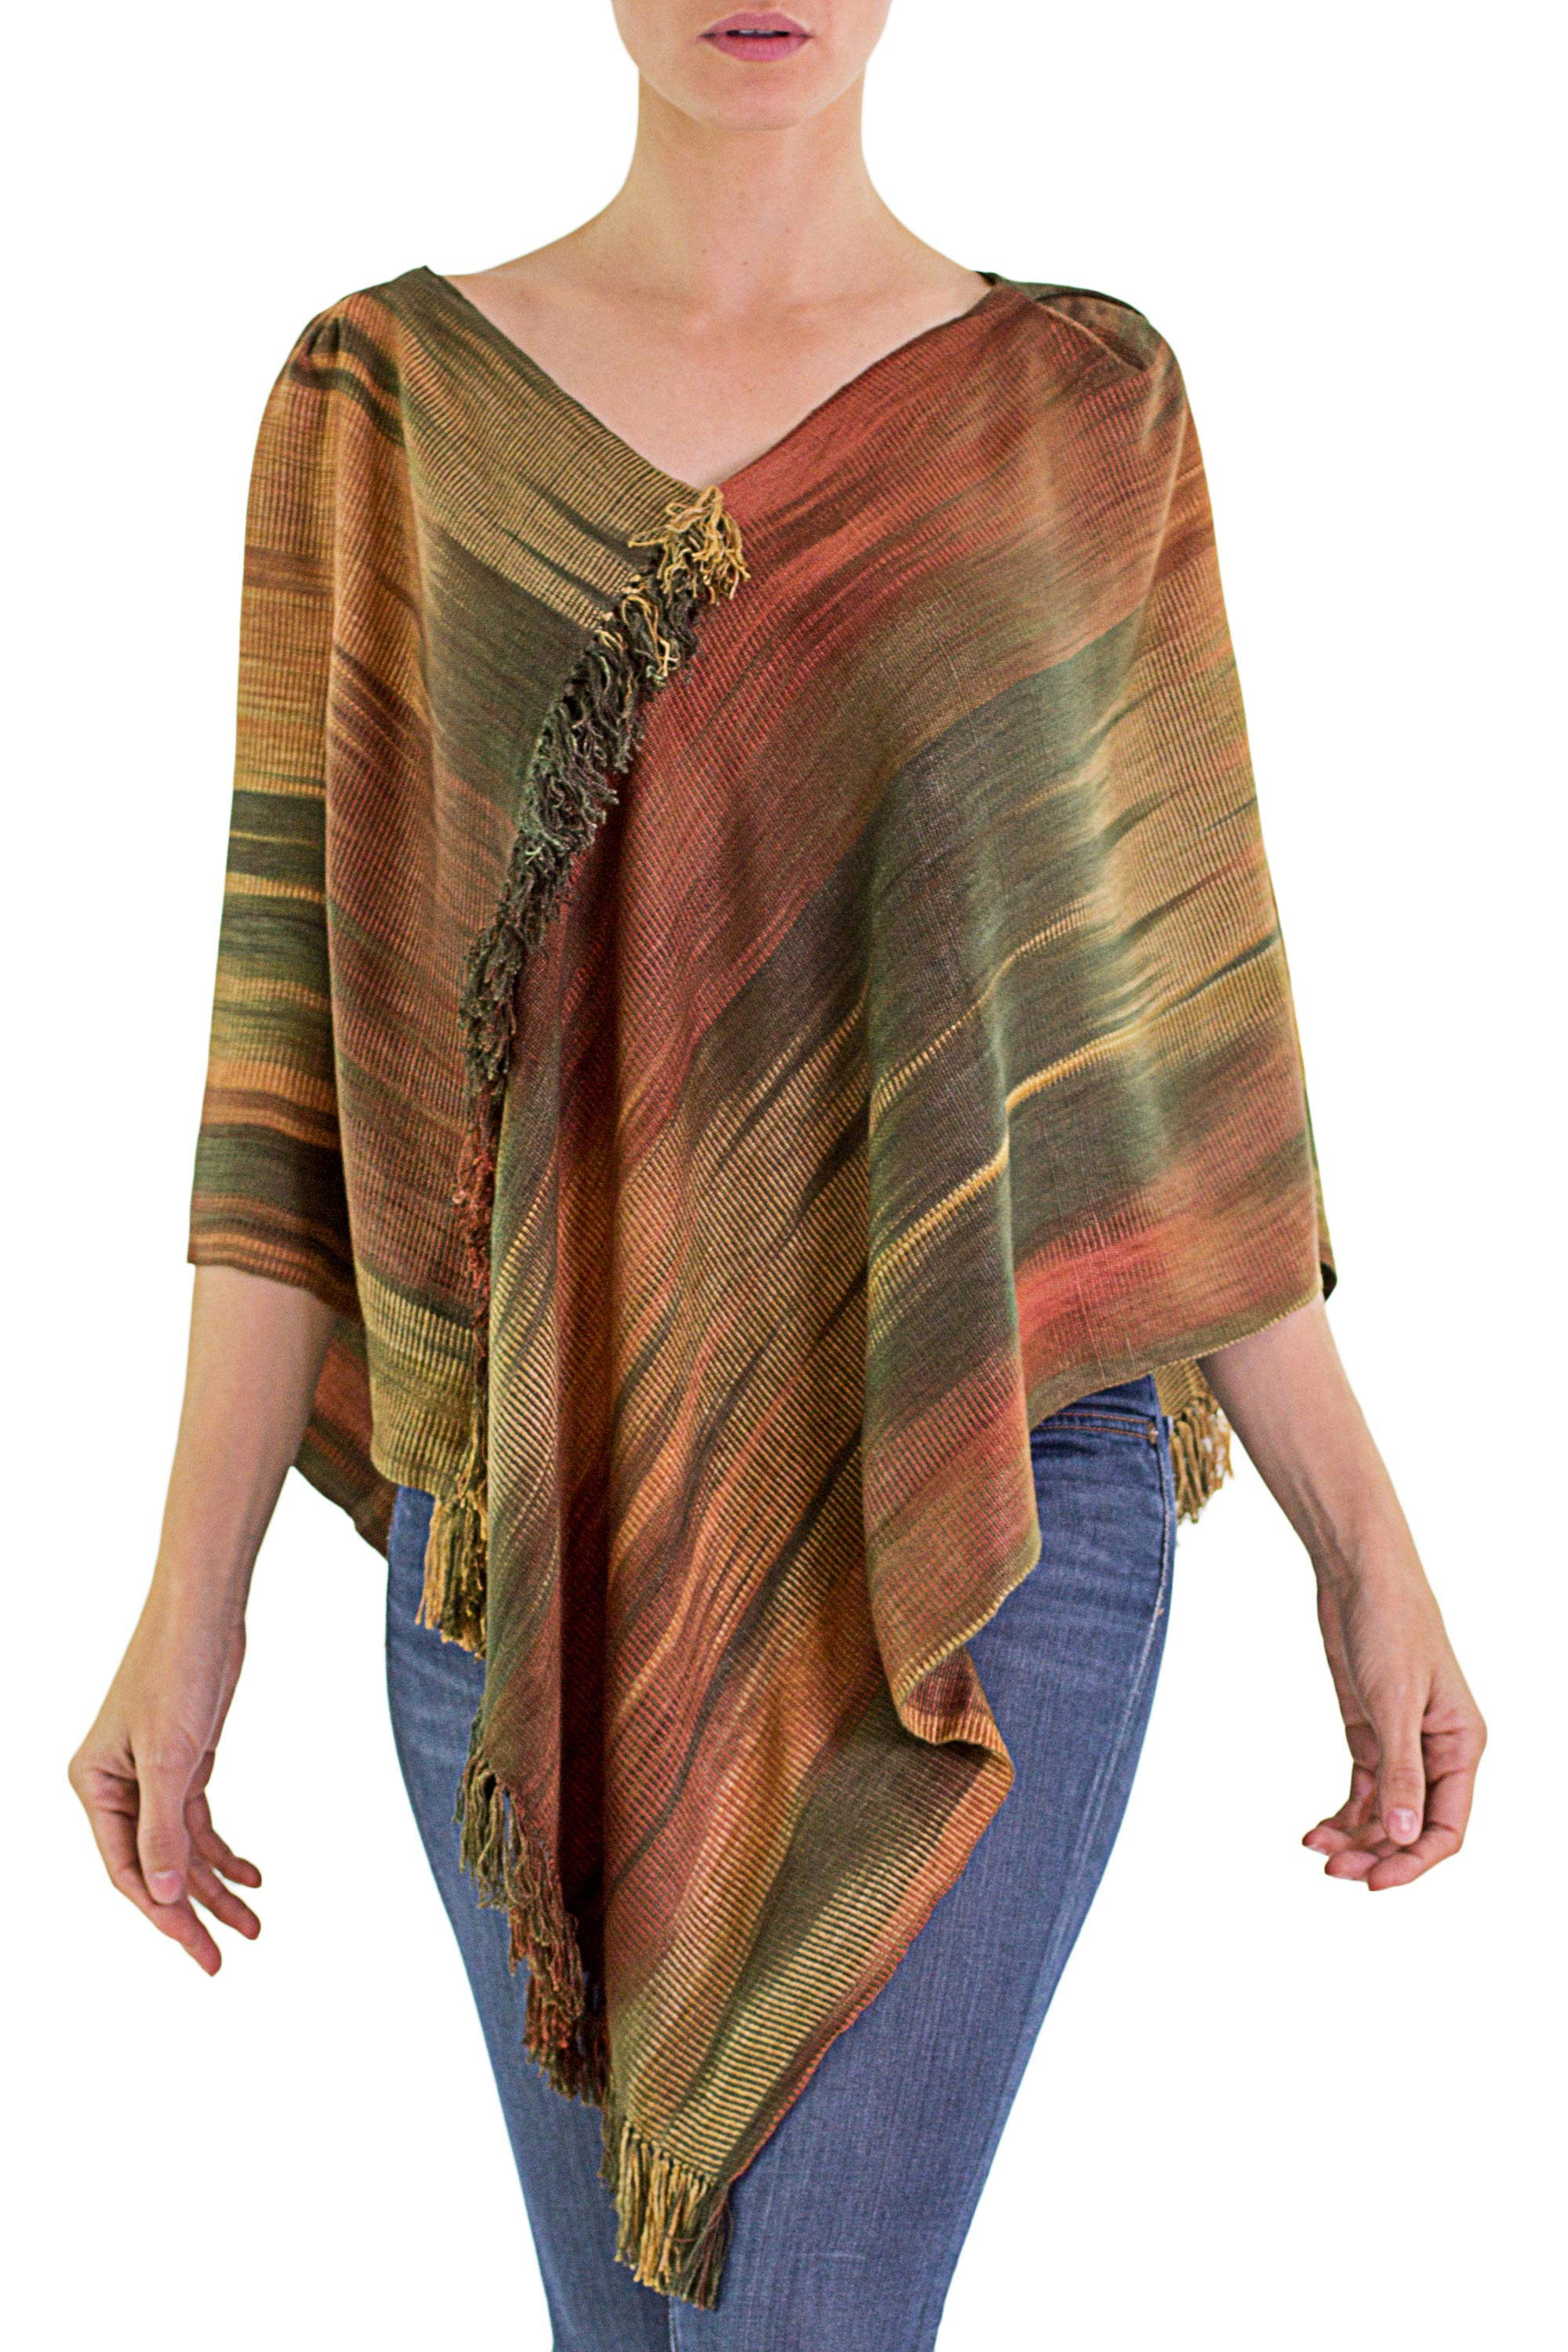 UNICEF Market | Hand Woven Ginger Rayon Poncho from Guatemala ...